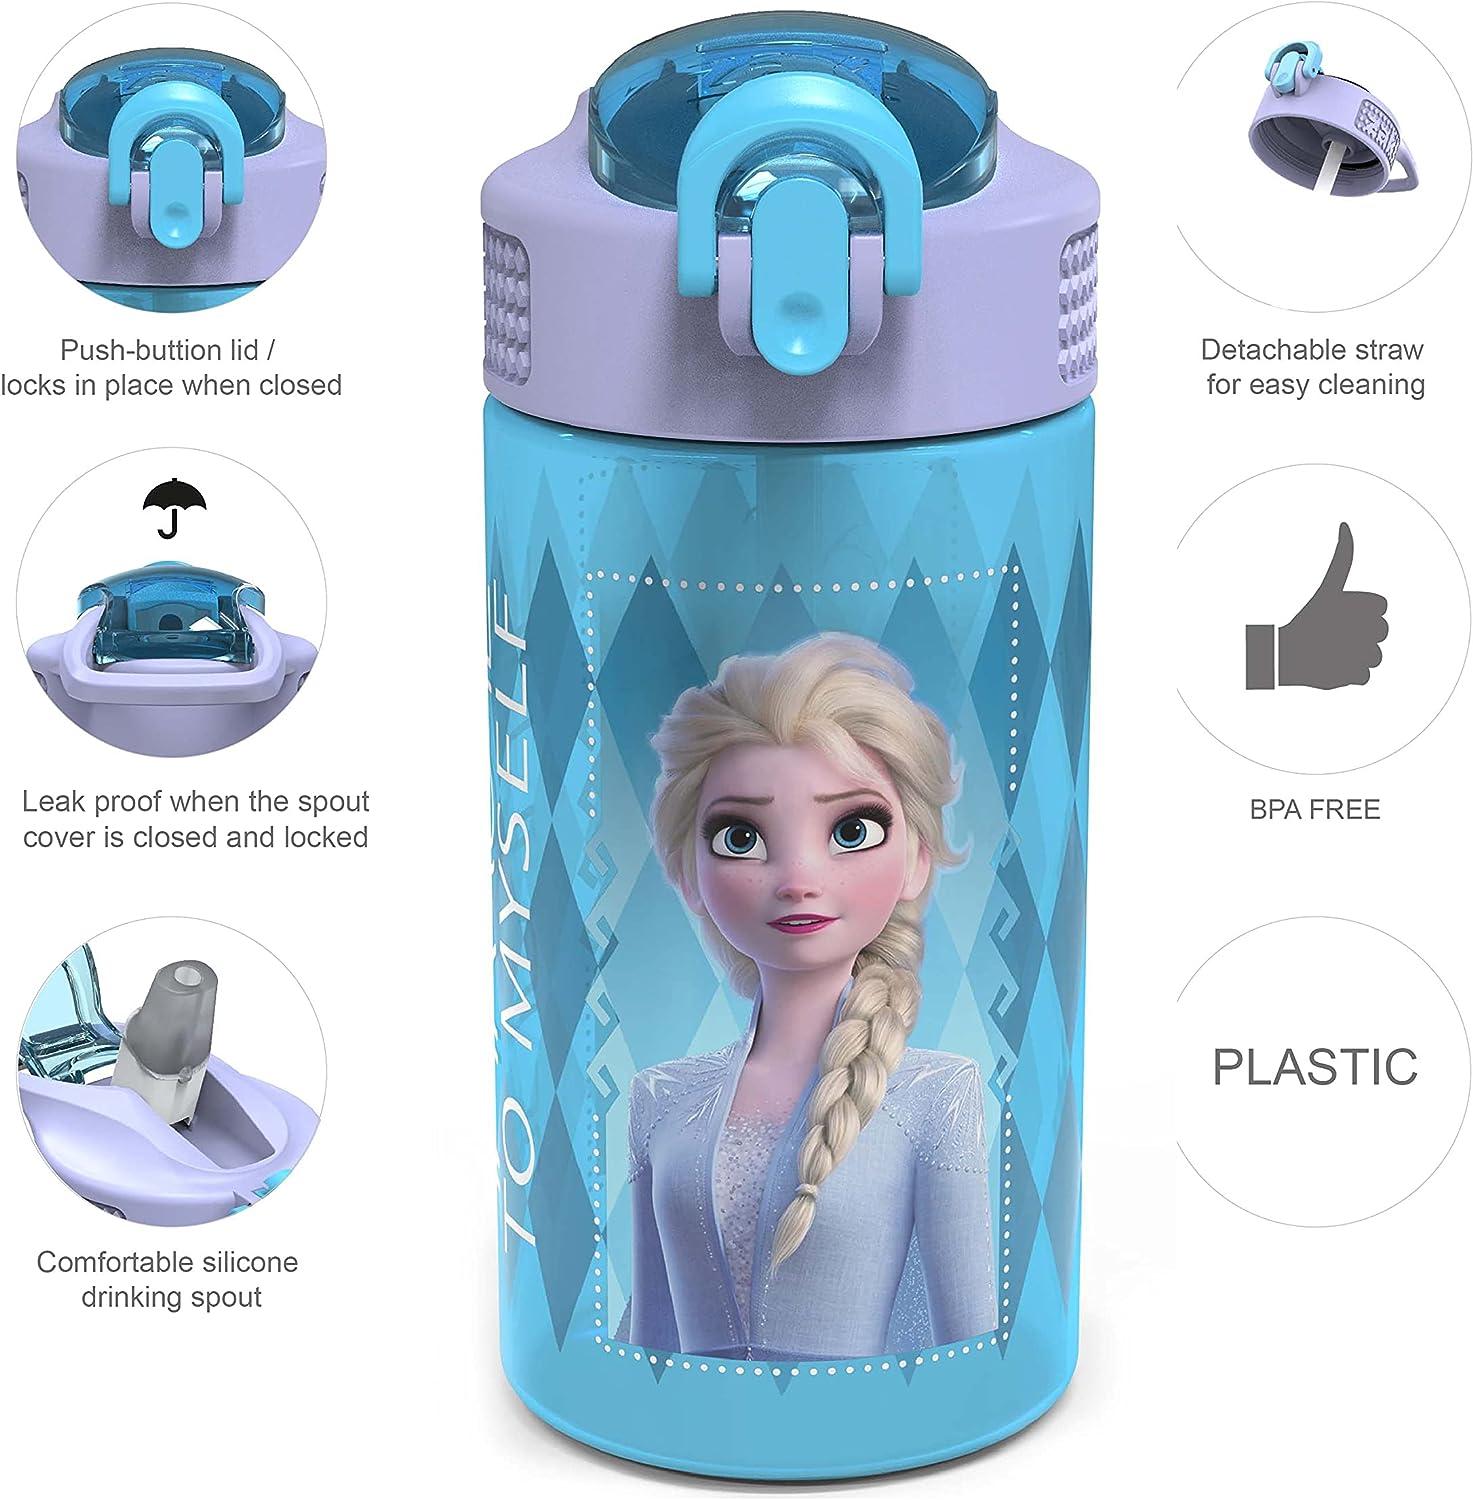 Set Of 2 Disney Frozen 2 Kids Water Bottles For $12.10 From  After  $15 Price Drop 